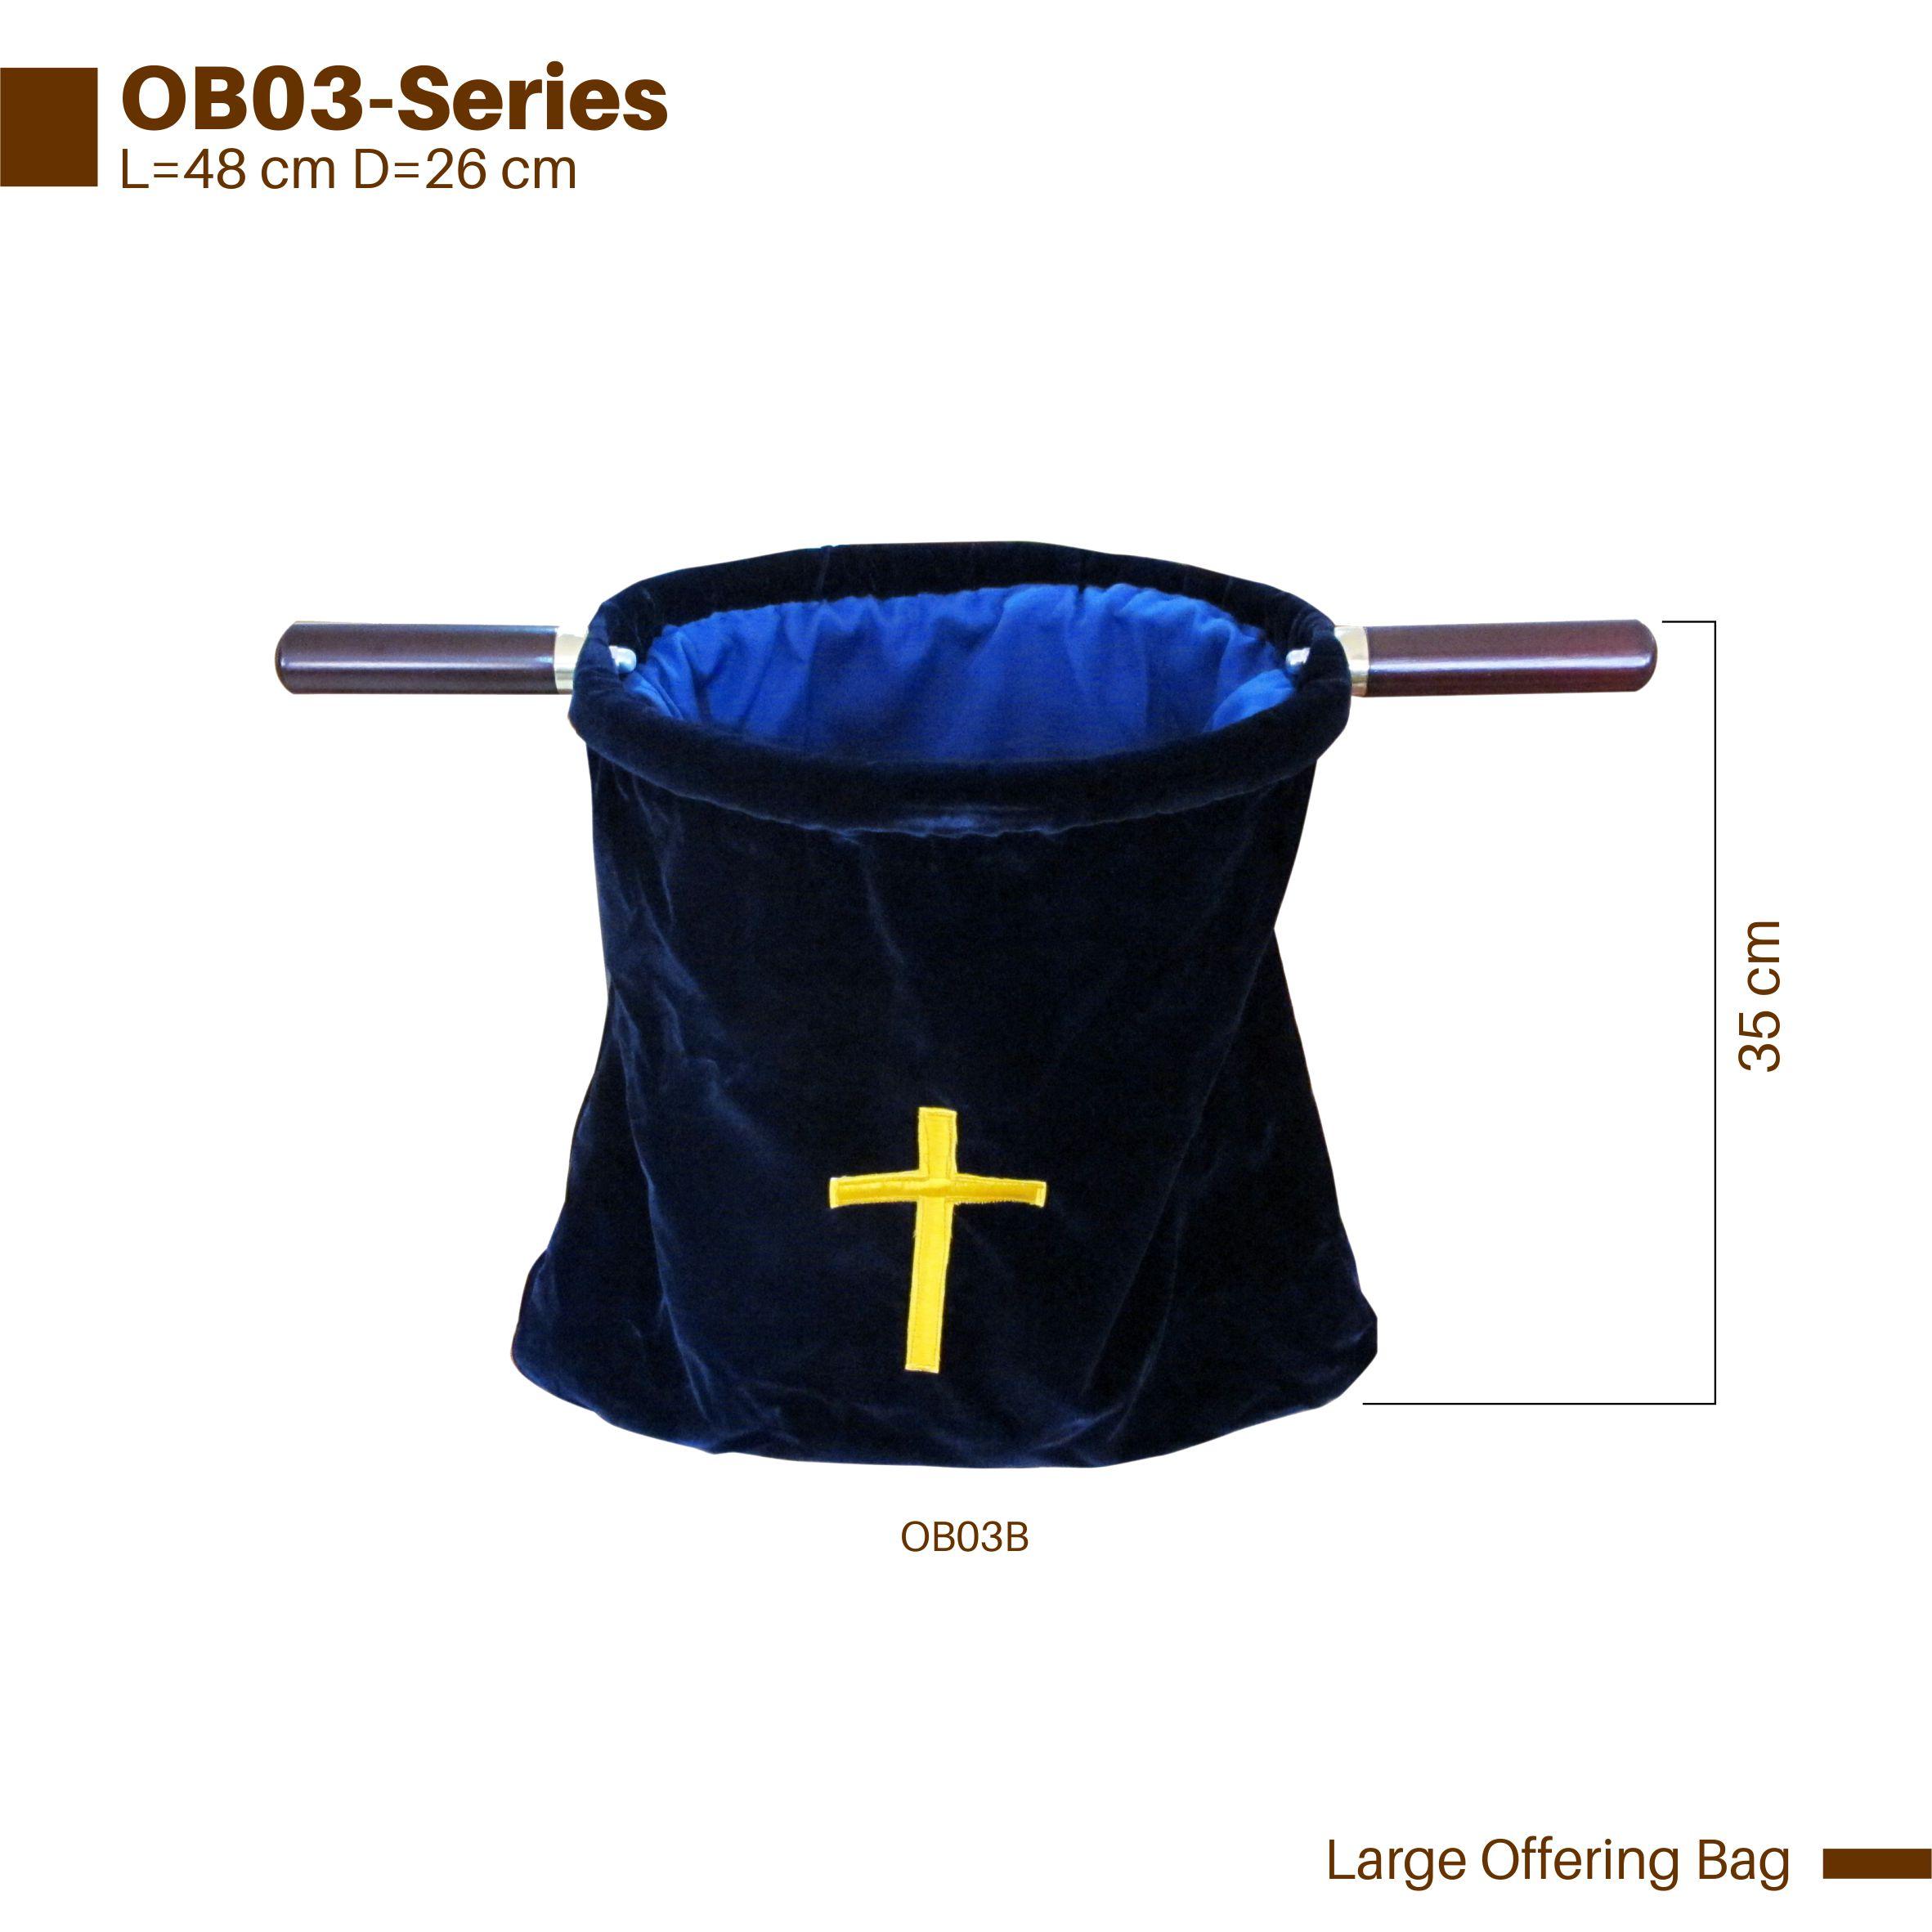 Offering Bag with Cross